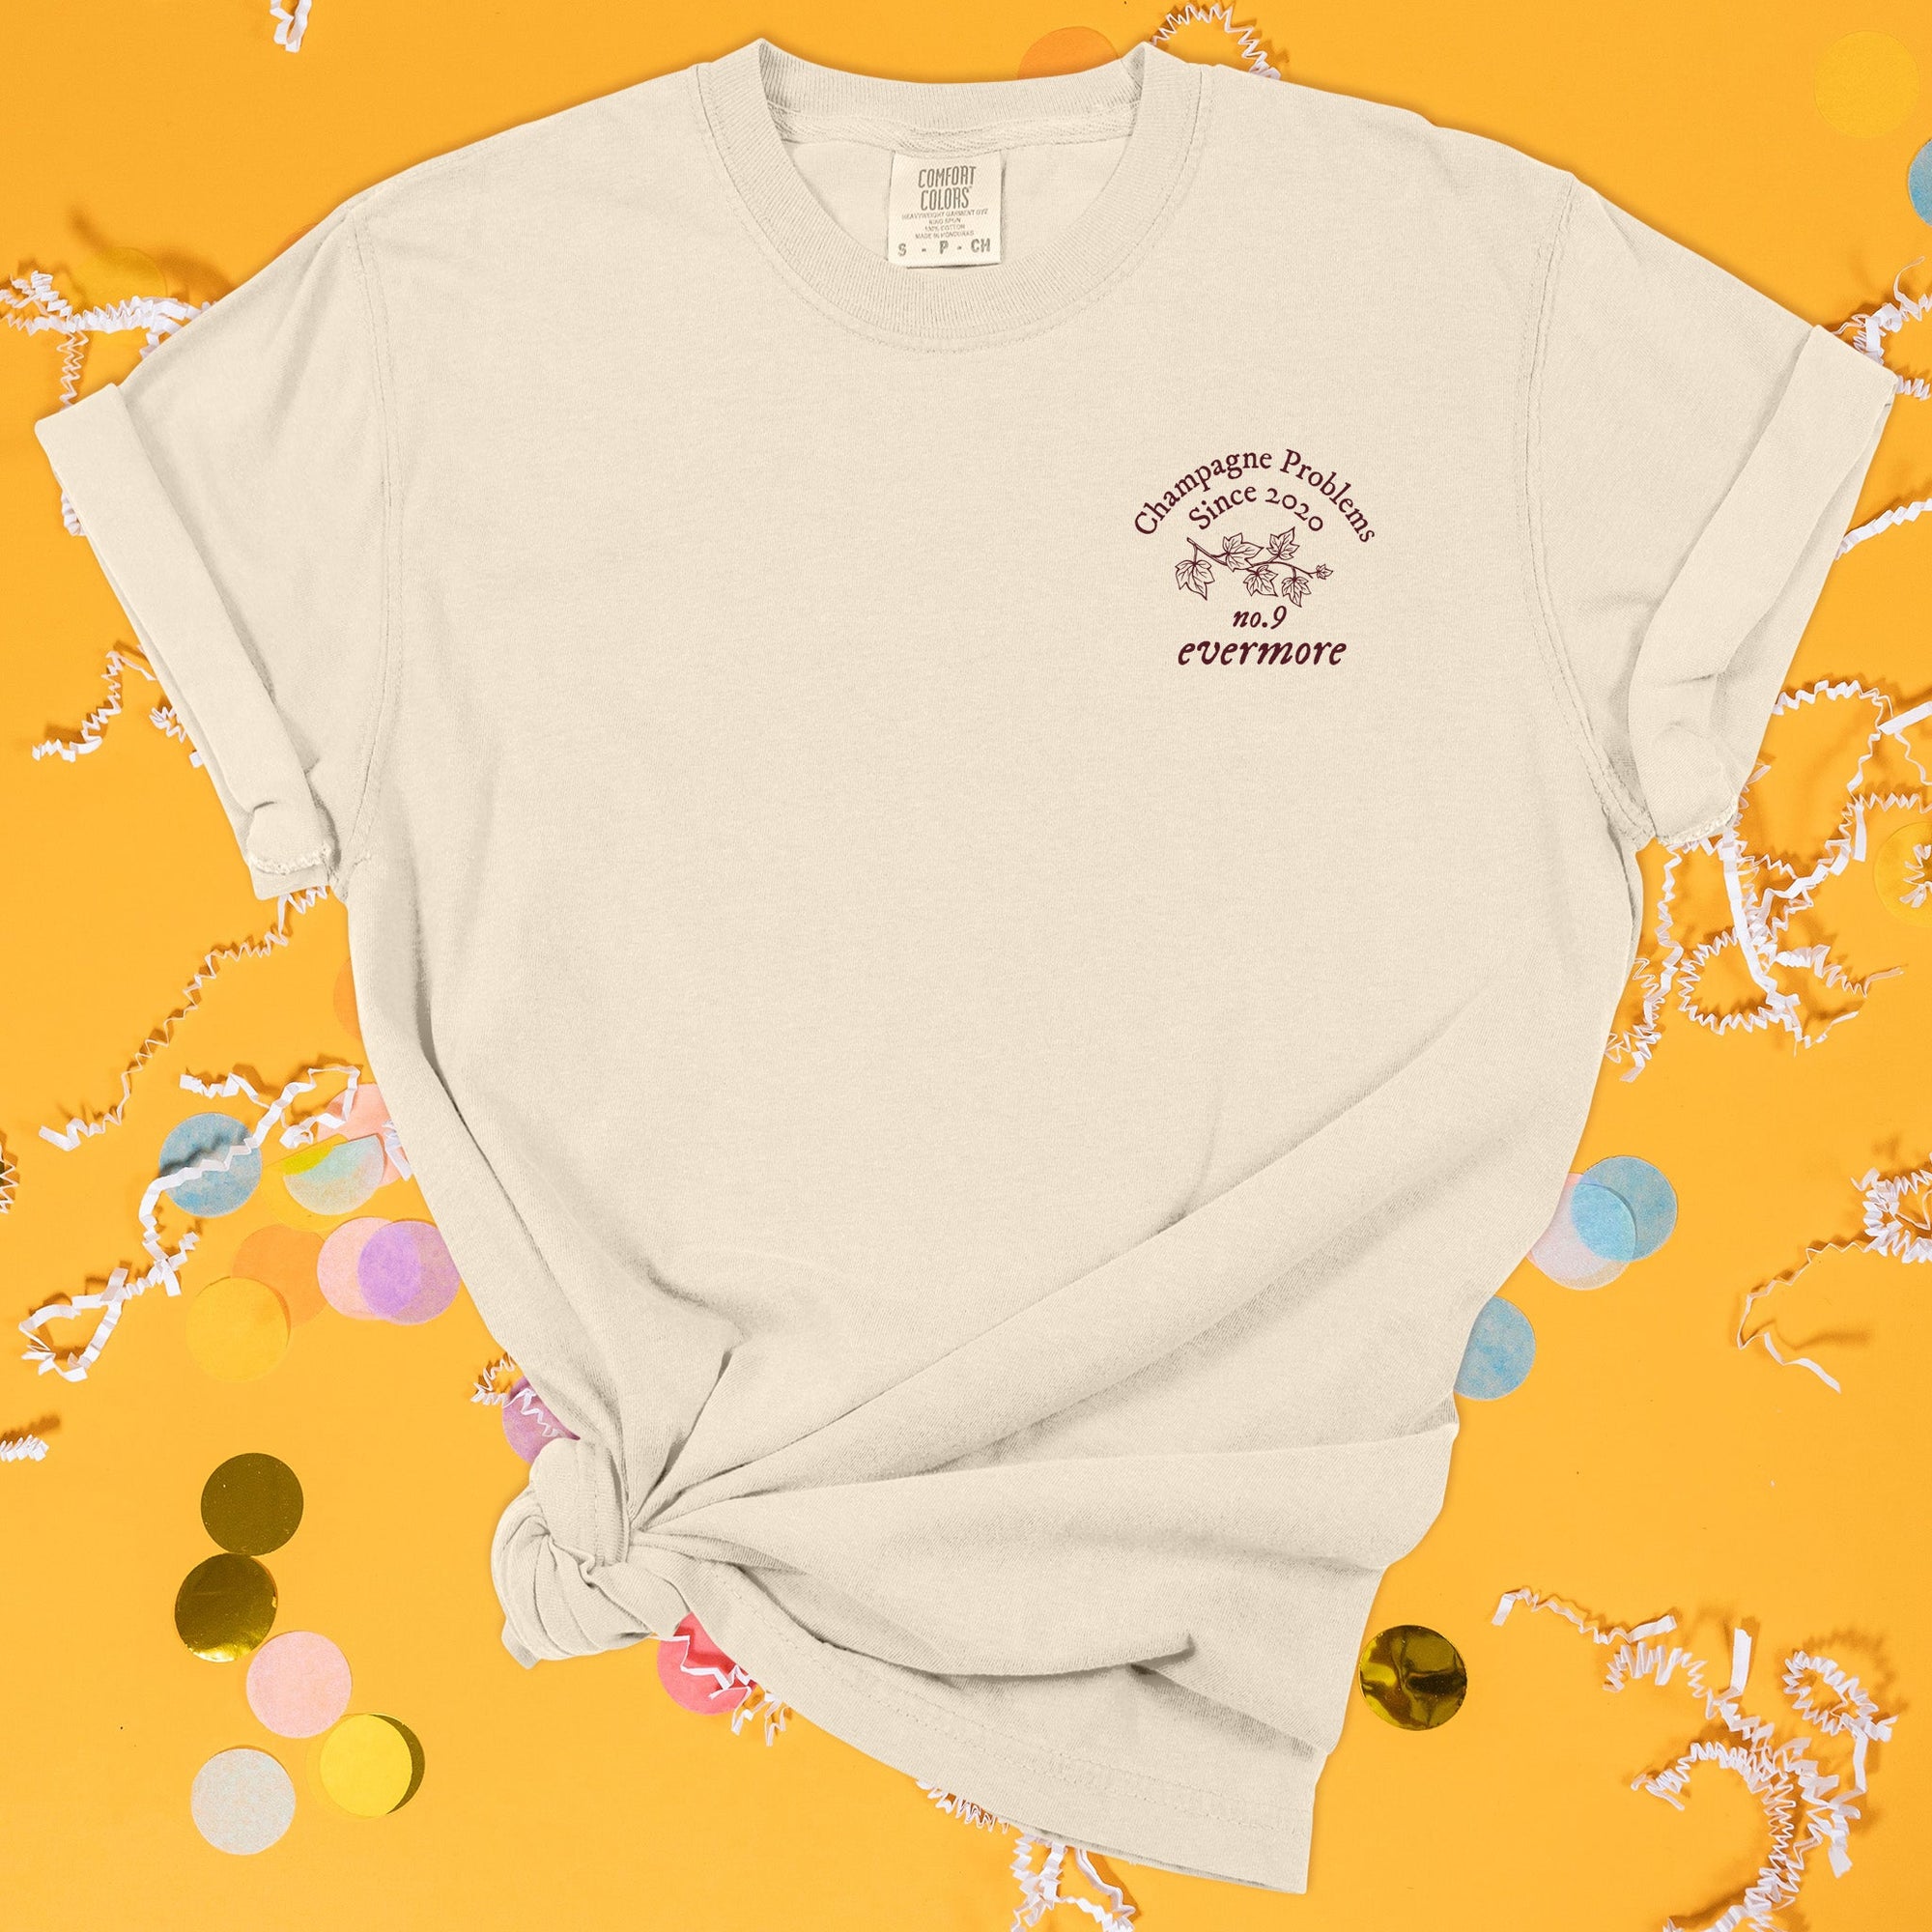 On a sunny mustard background sits the front of a t-shirt with white crinkle and big, colorful confetti scattered around. This Taylor Swift Inspired Reputation tee is ivory with maroon lettering and illustration over the left chest area. It has an illustration of fall leaves on a branch and it says "Champagne Problems Since 2020, No.9 evermore."